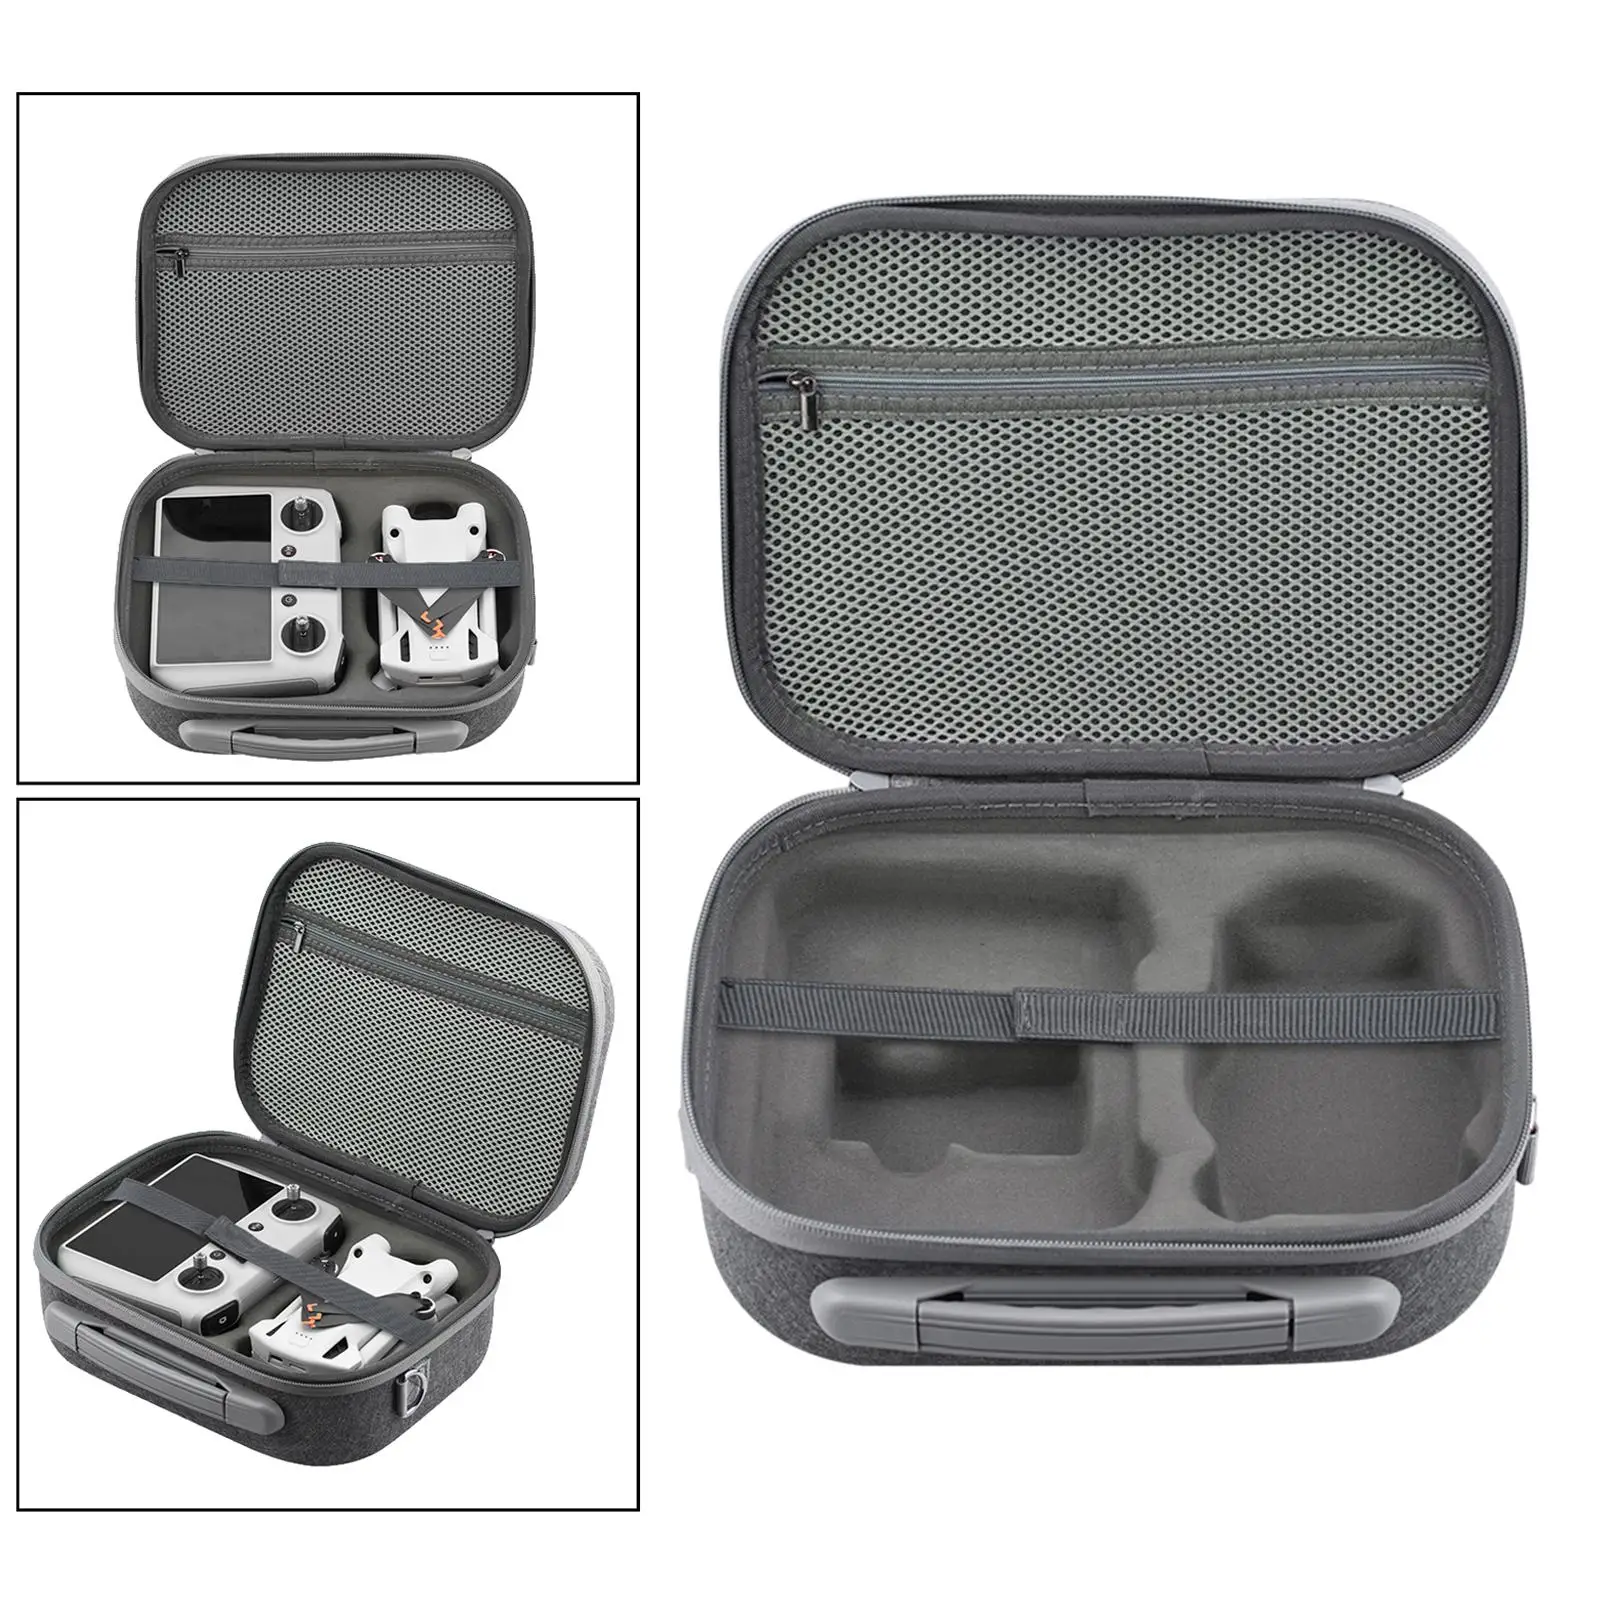 Portable Carrying Case Waterproof with Shoulder Strap Travel Suitcase Storage Bag Handbag for DJI Mini 3 Pro Drone Accessories